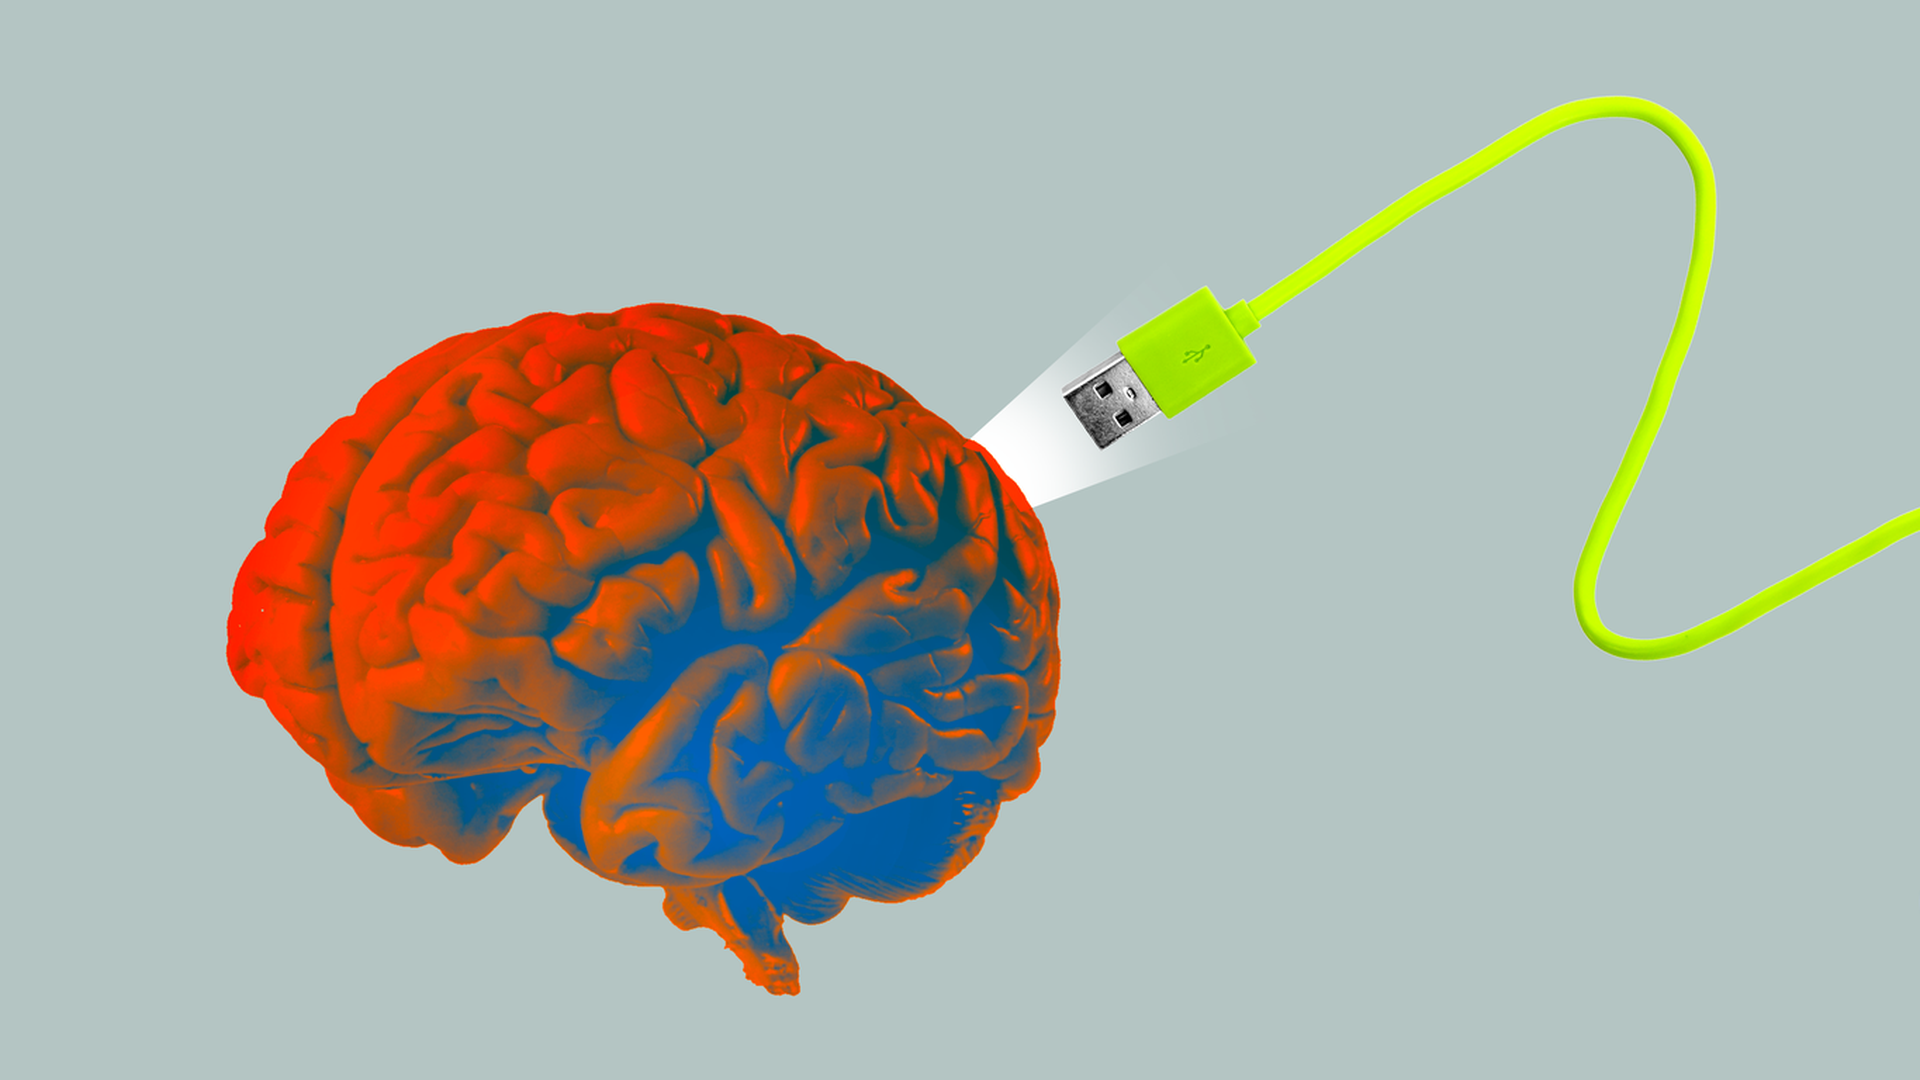 Illustration of a USB cable being plugged into a brain